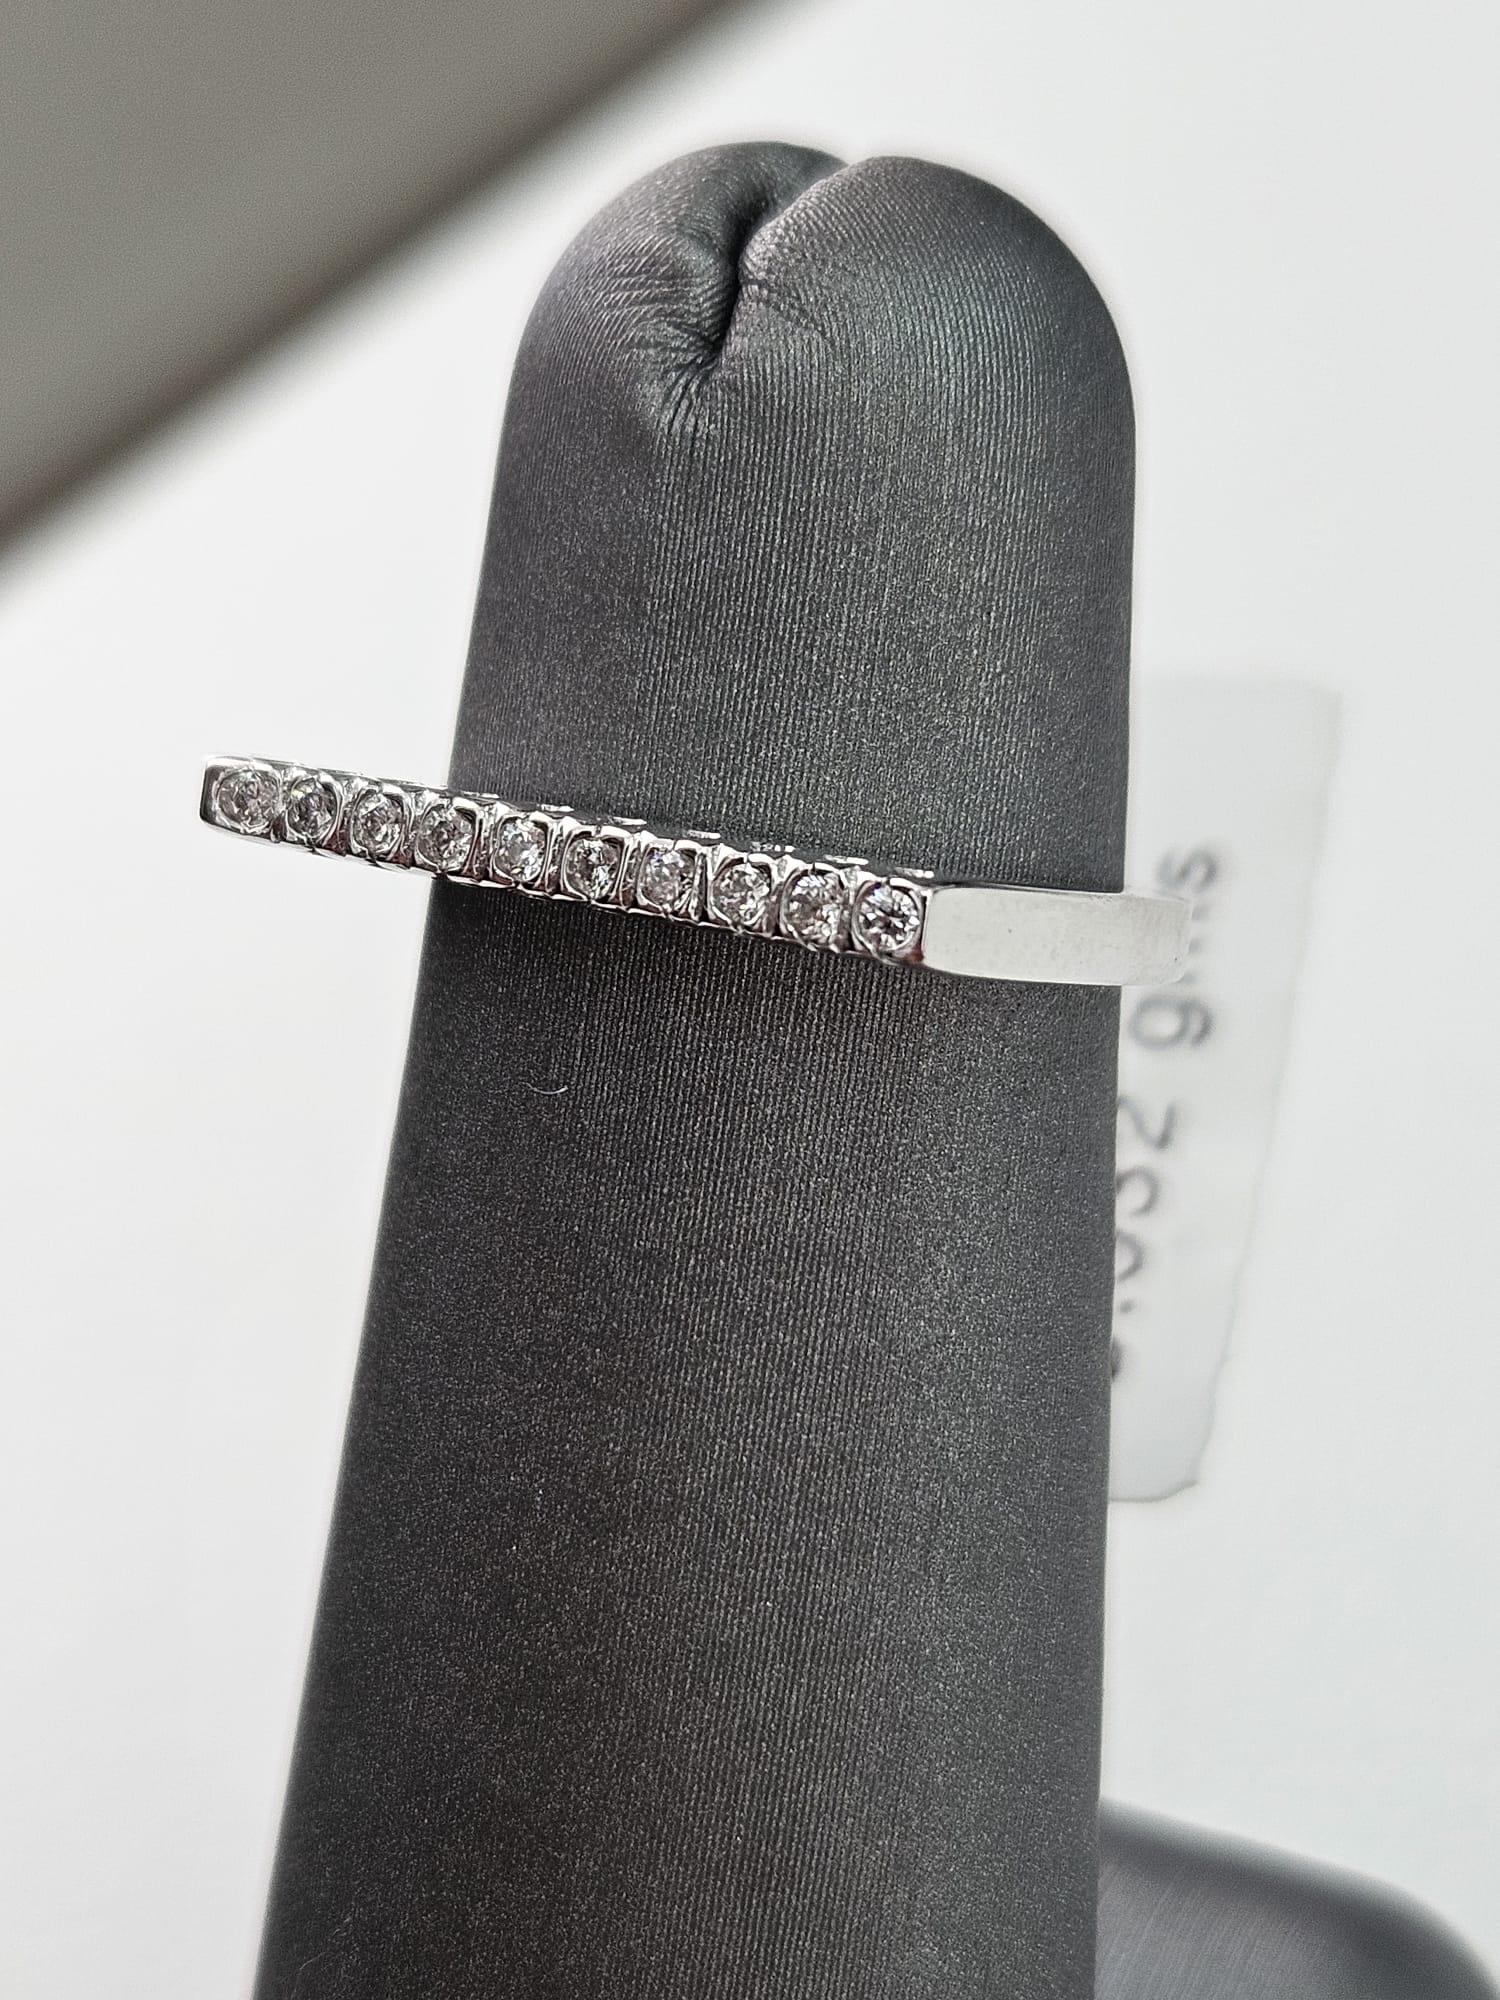 0.13 Ct White Diamond Band Ring with White Gold In New Condition For Sale In New York, NY